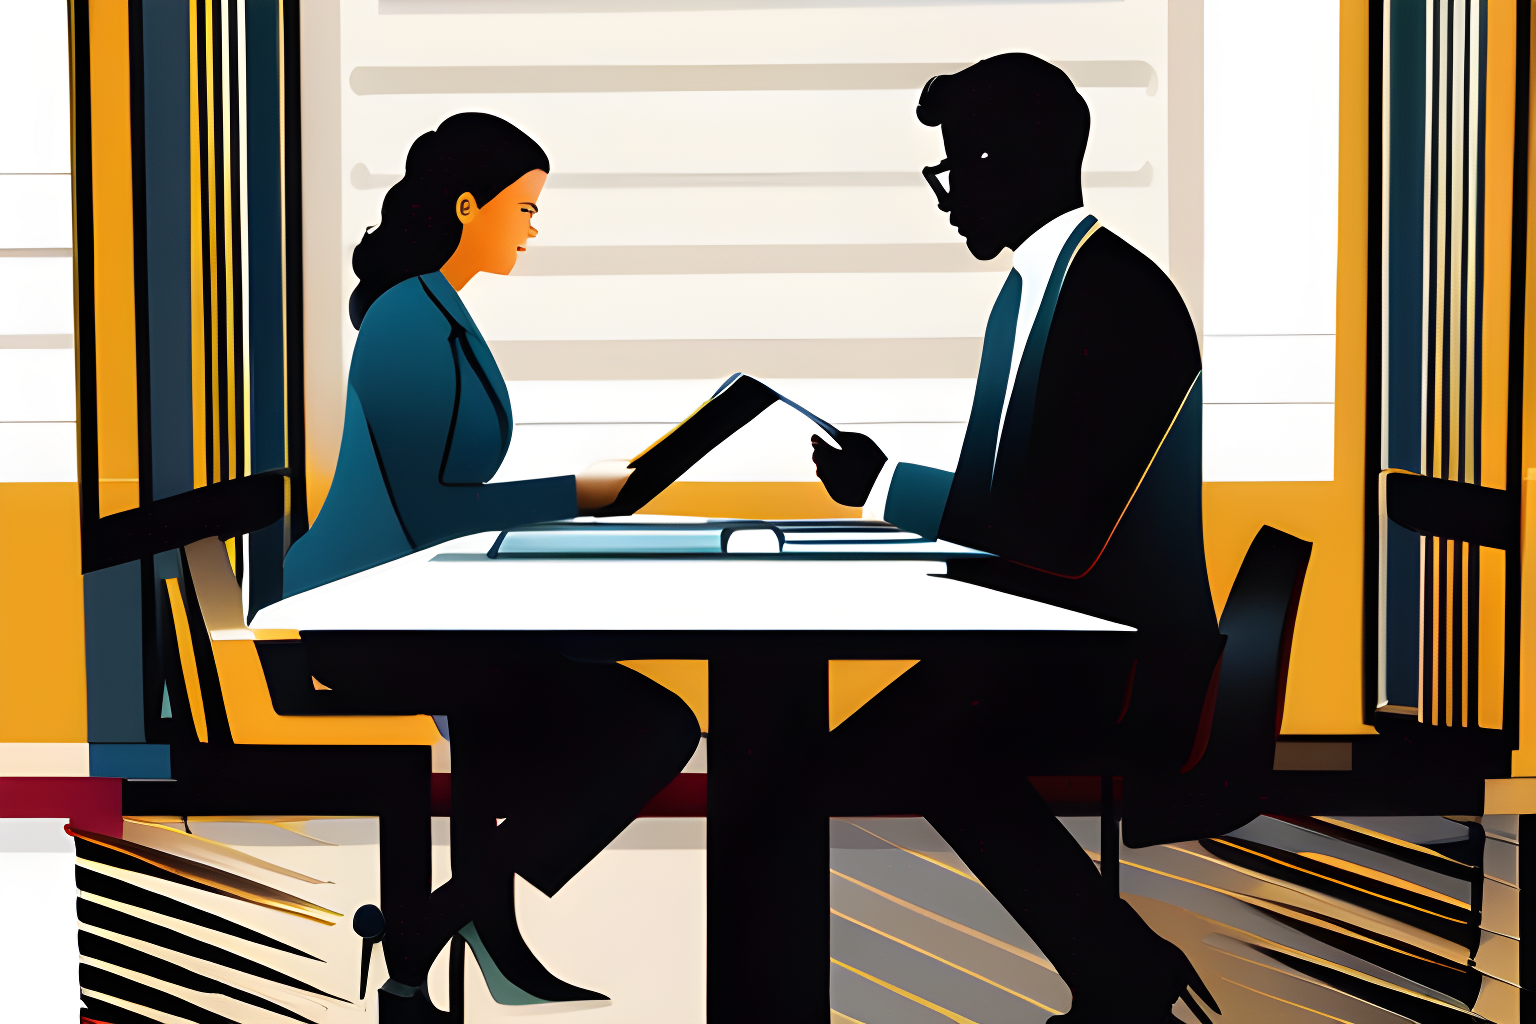 Generate an image featuring two (2) individuals in a professional setting, seated at a table with a document in front of them